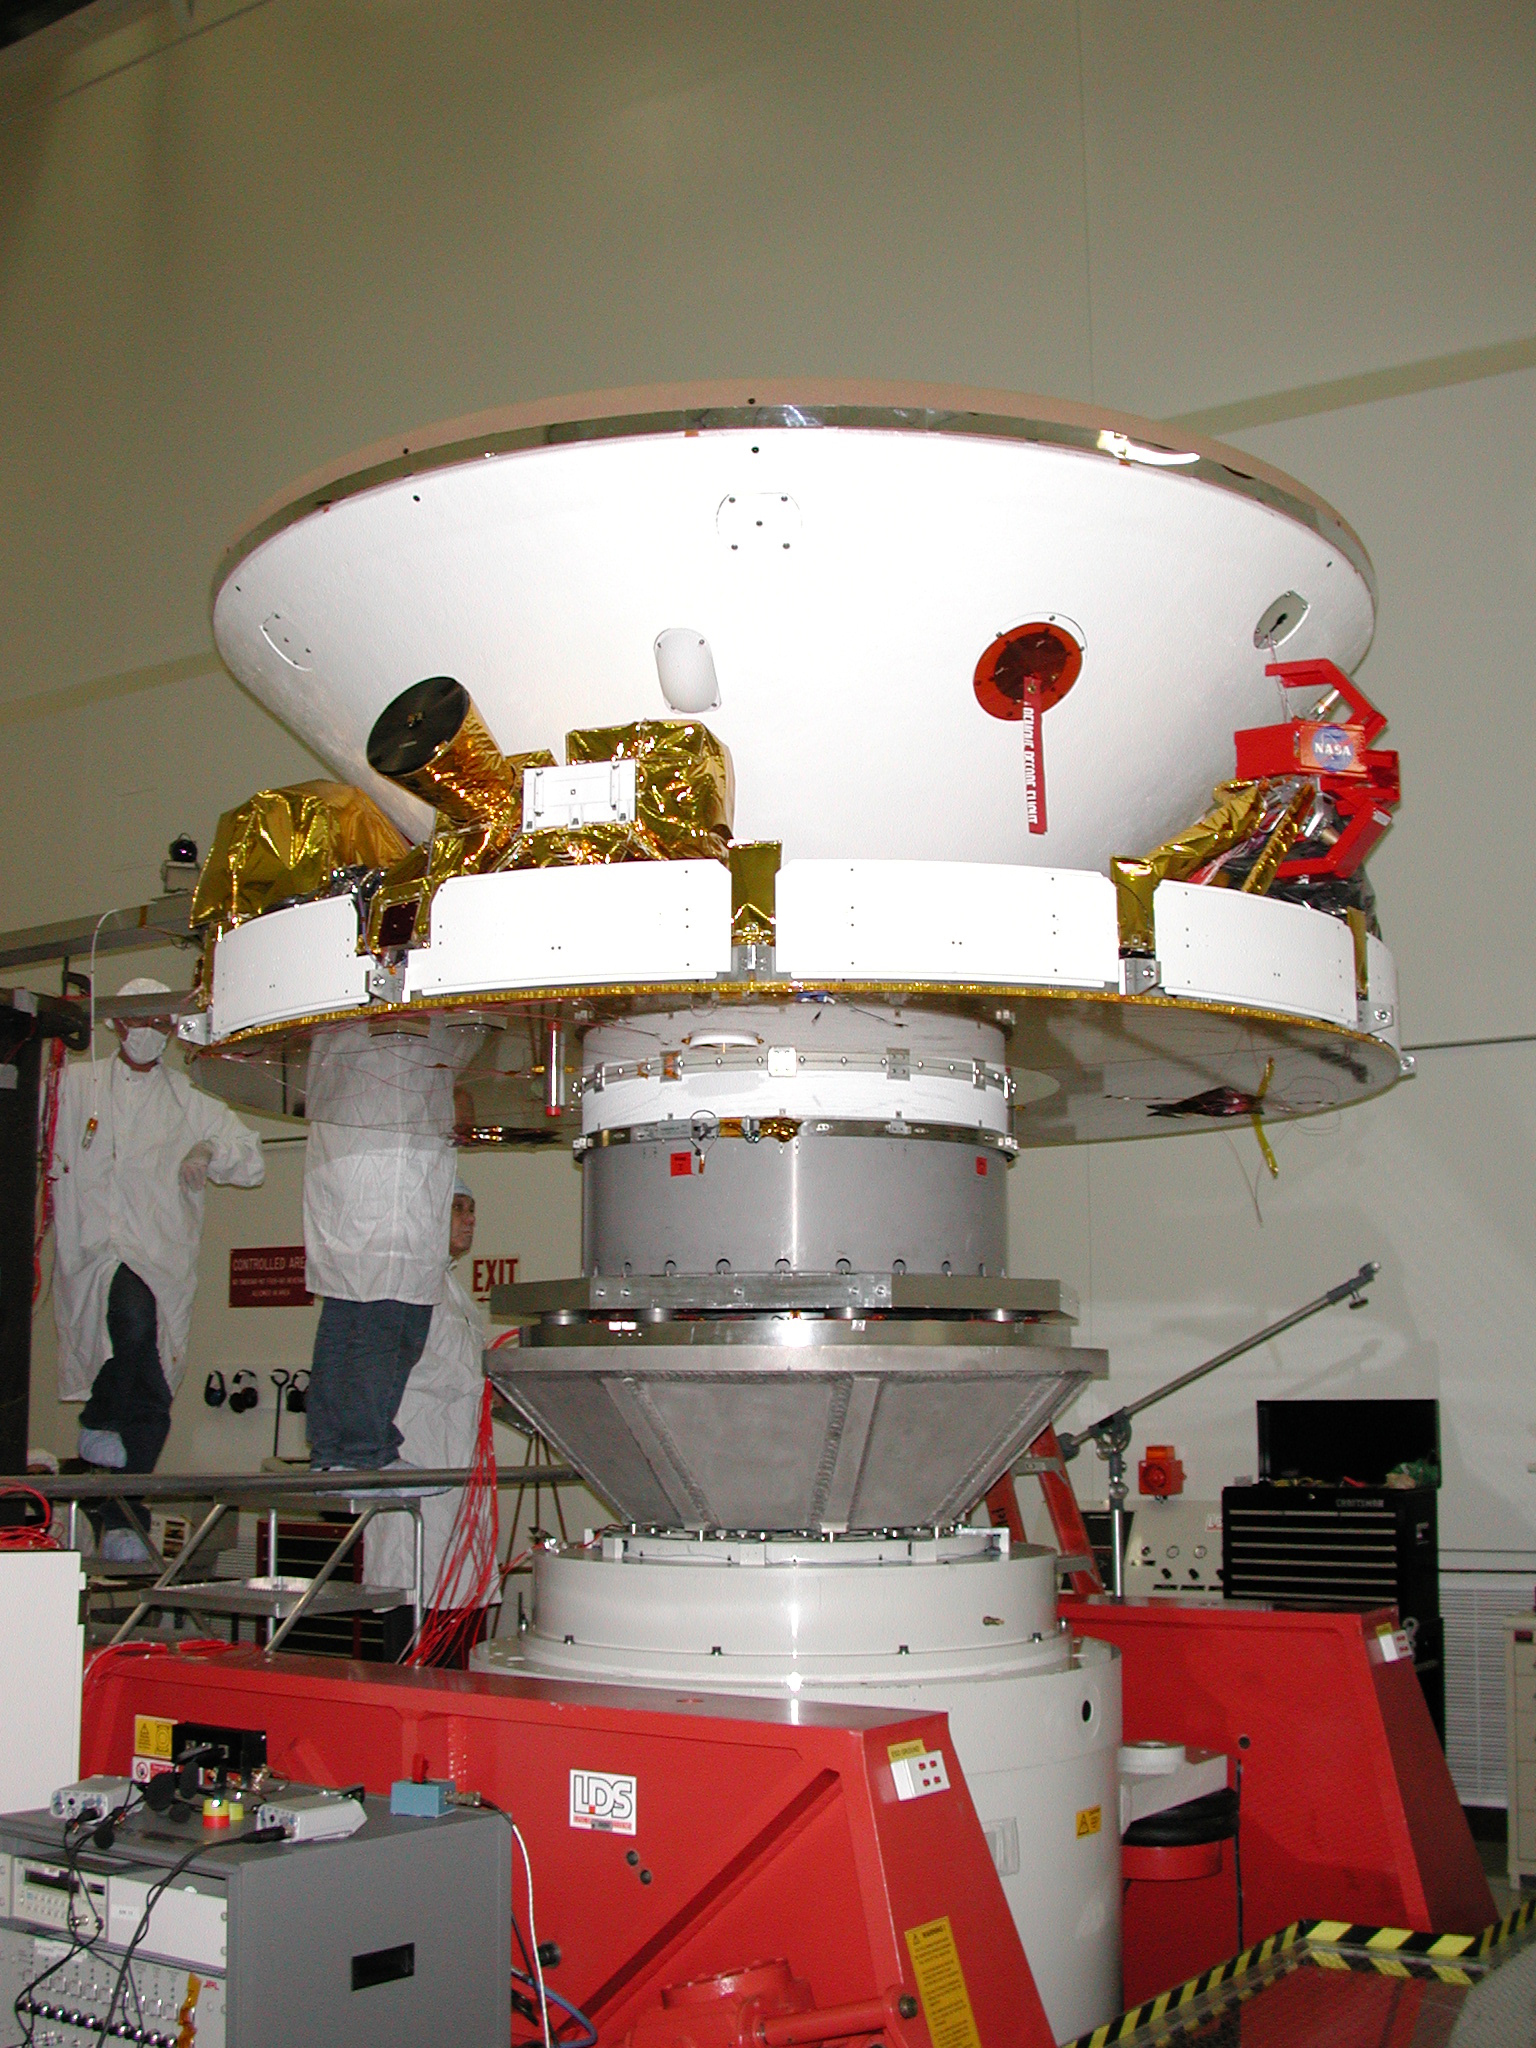 In this photo, engineers are preparing the rover for vibration testing to ensure that it can undergo the rigors of launch and entry into the martian atmosphere. The rovers are scheduled to launch next spring and will arrive at Mars in January 2004.